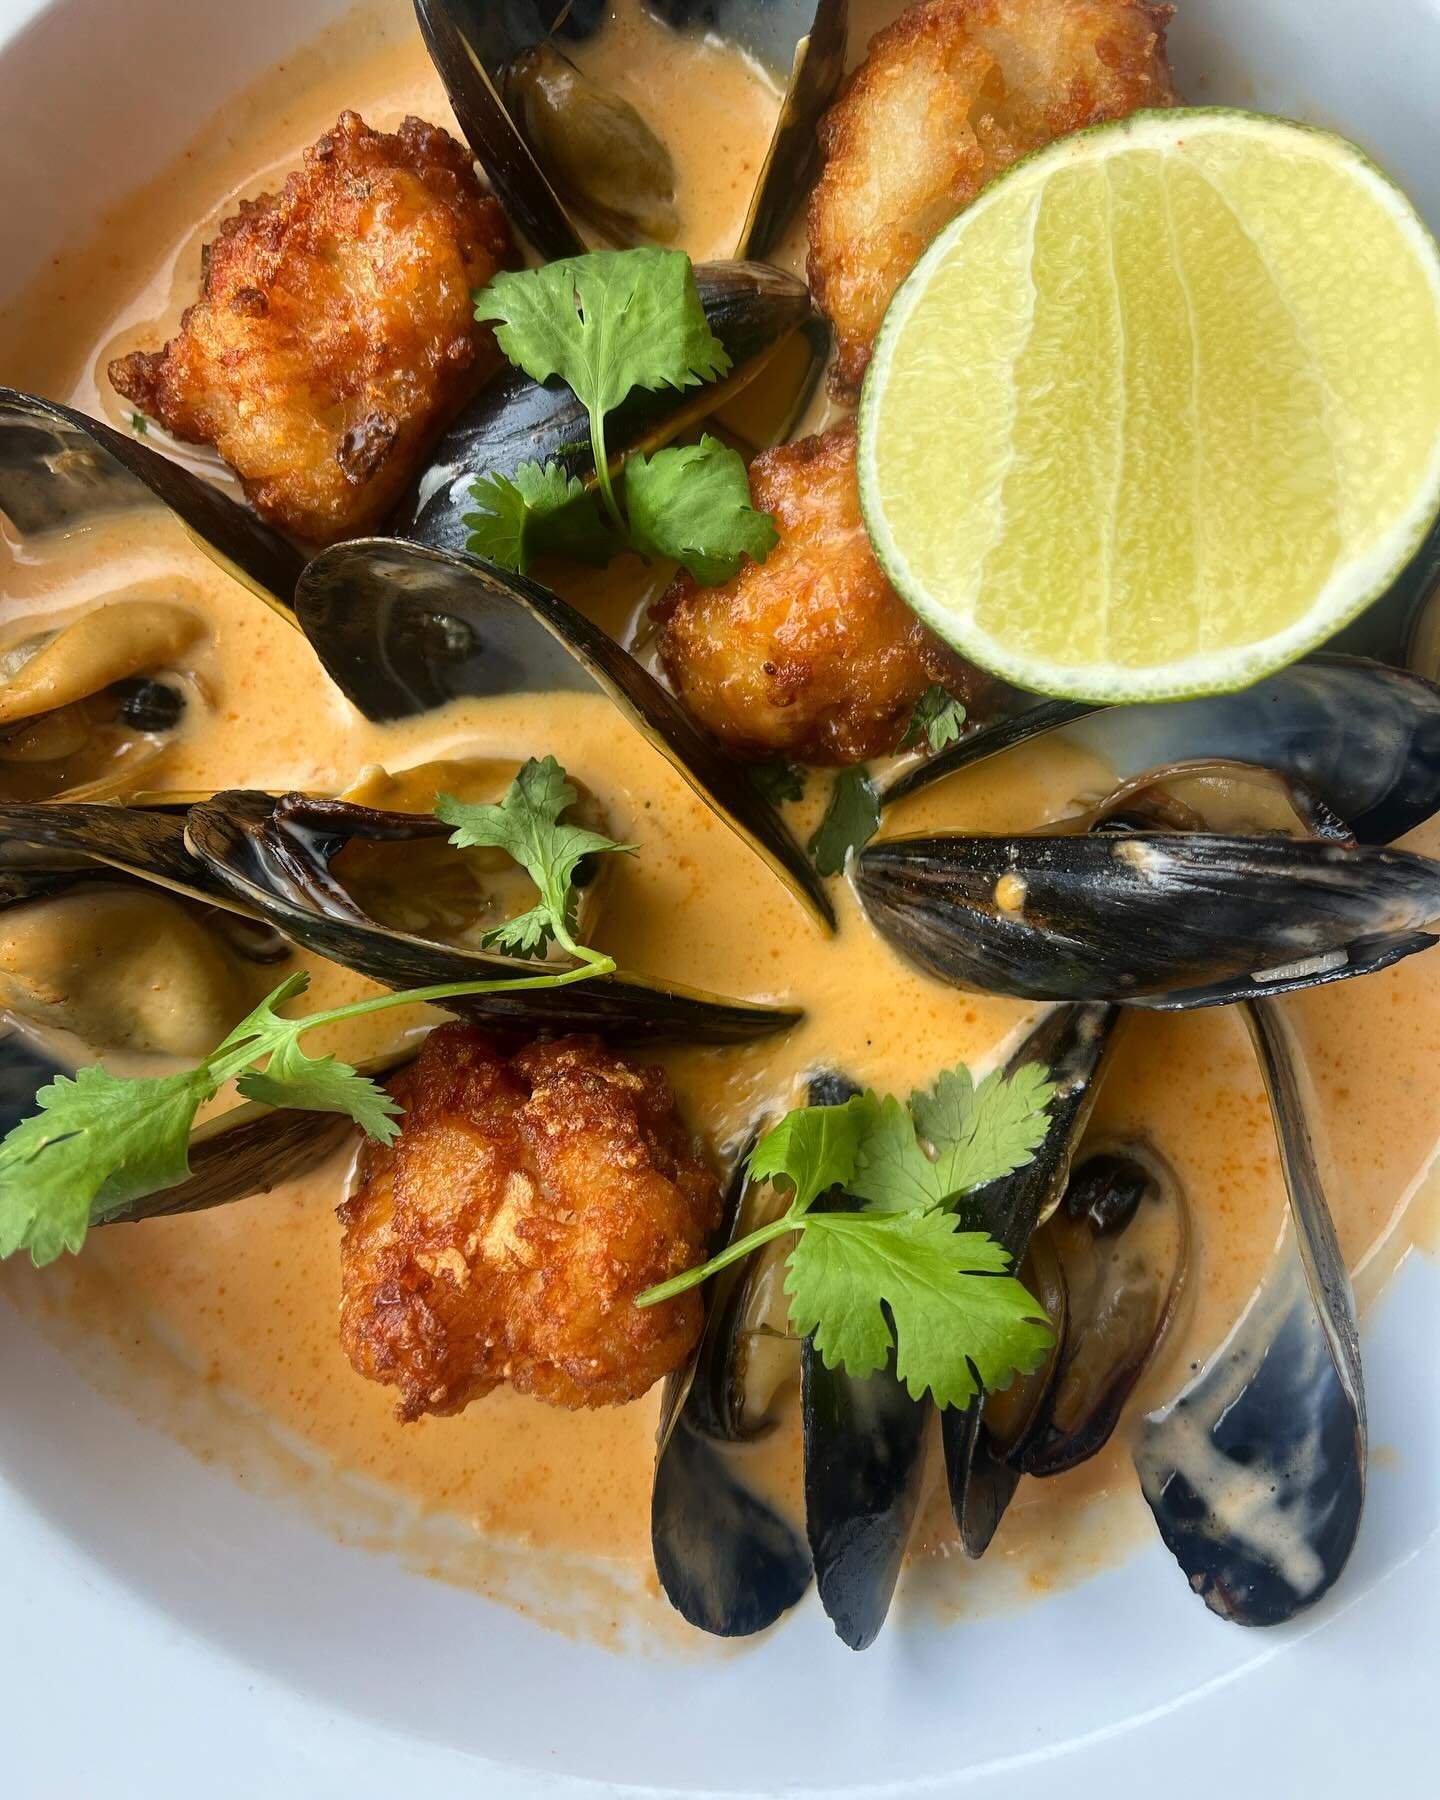 New mussels 🤌🏼😍 With coconut curry sauce, crispy shrimp &amp; rice balls, and cilantro. Pairs perfectly with an ice cold beer. 

And speaking of beer, starting May 9th every Thursday is 
✨🍻PITCHER NIGHT🍻✨

From 4pm - close we&rsquo;ll be offerin